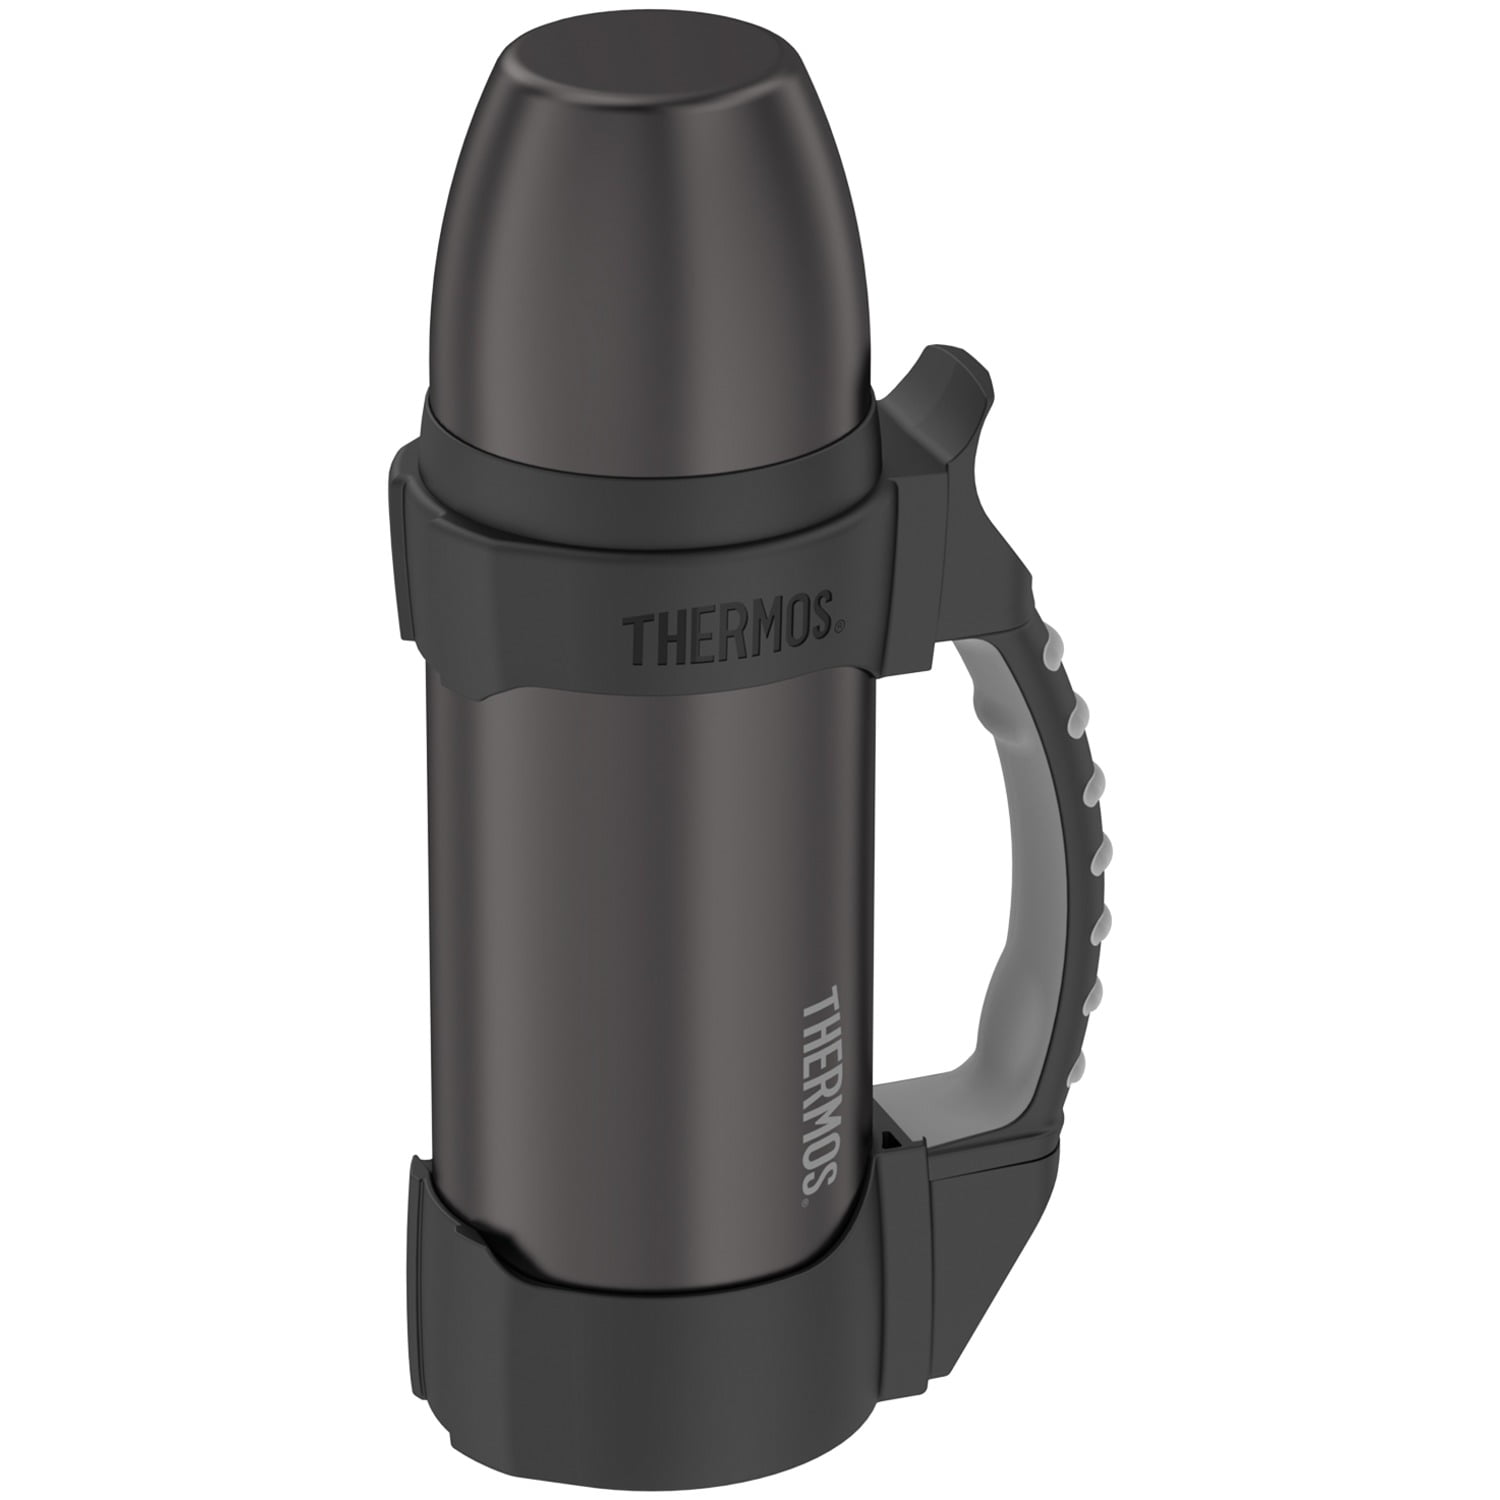 Thermos 2510GM2 1.1-Quart The Rock Vacuum Insulated Beverage Bottle